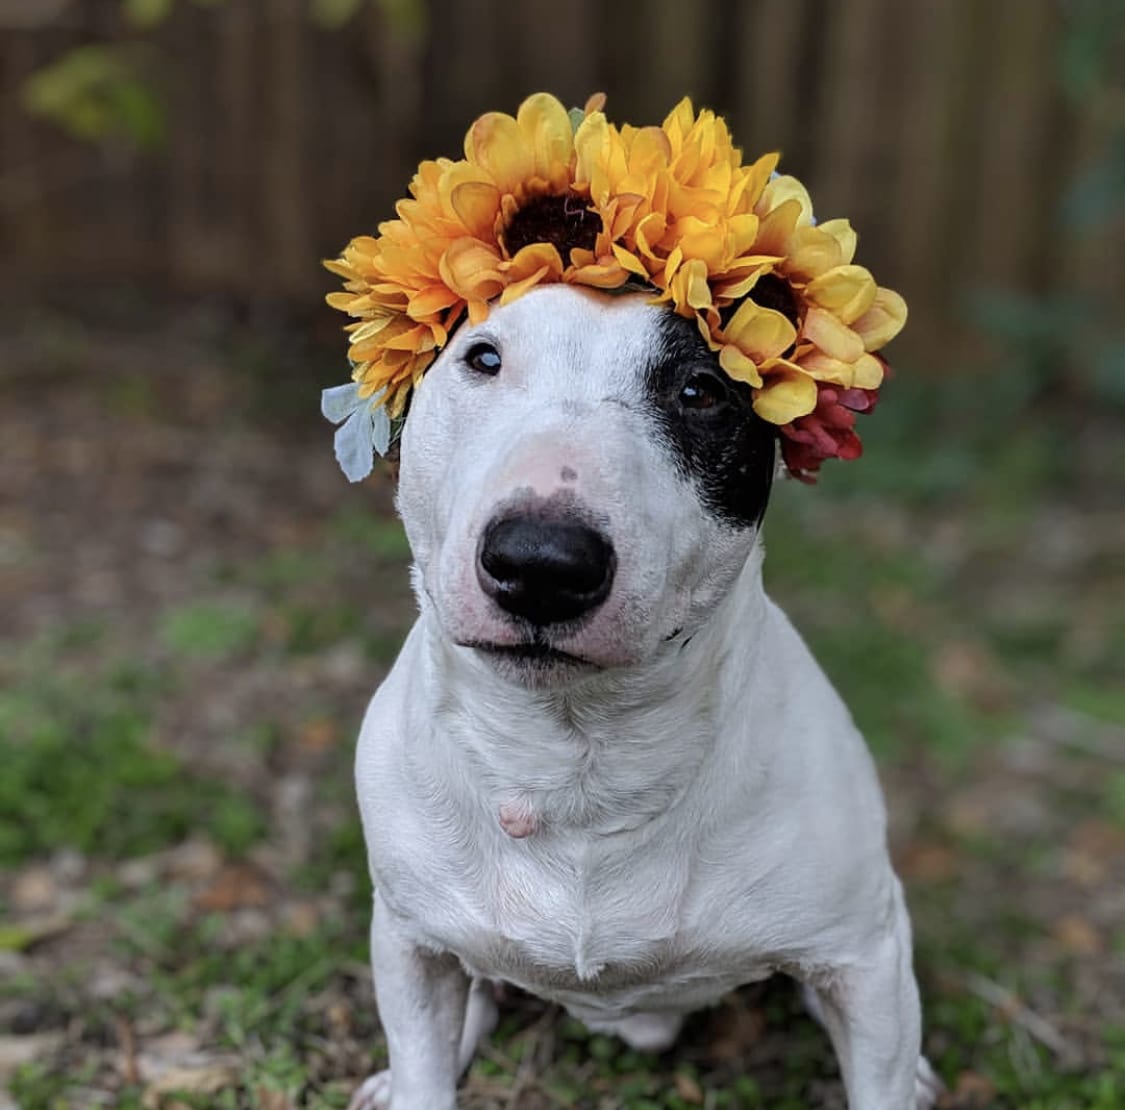 A Bull Terrier wearing sunflower crown on top of its head while sitting on the grass